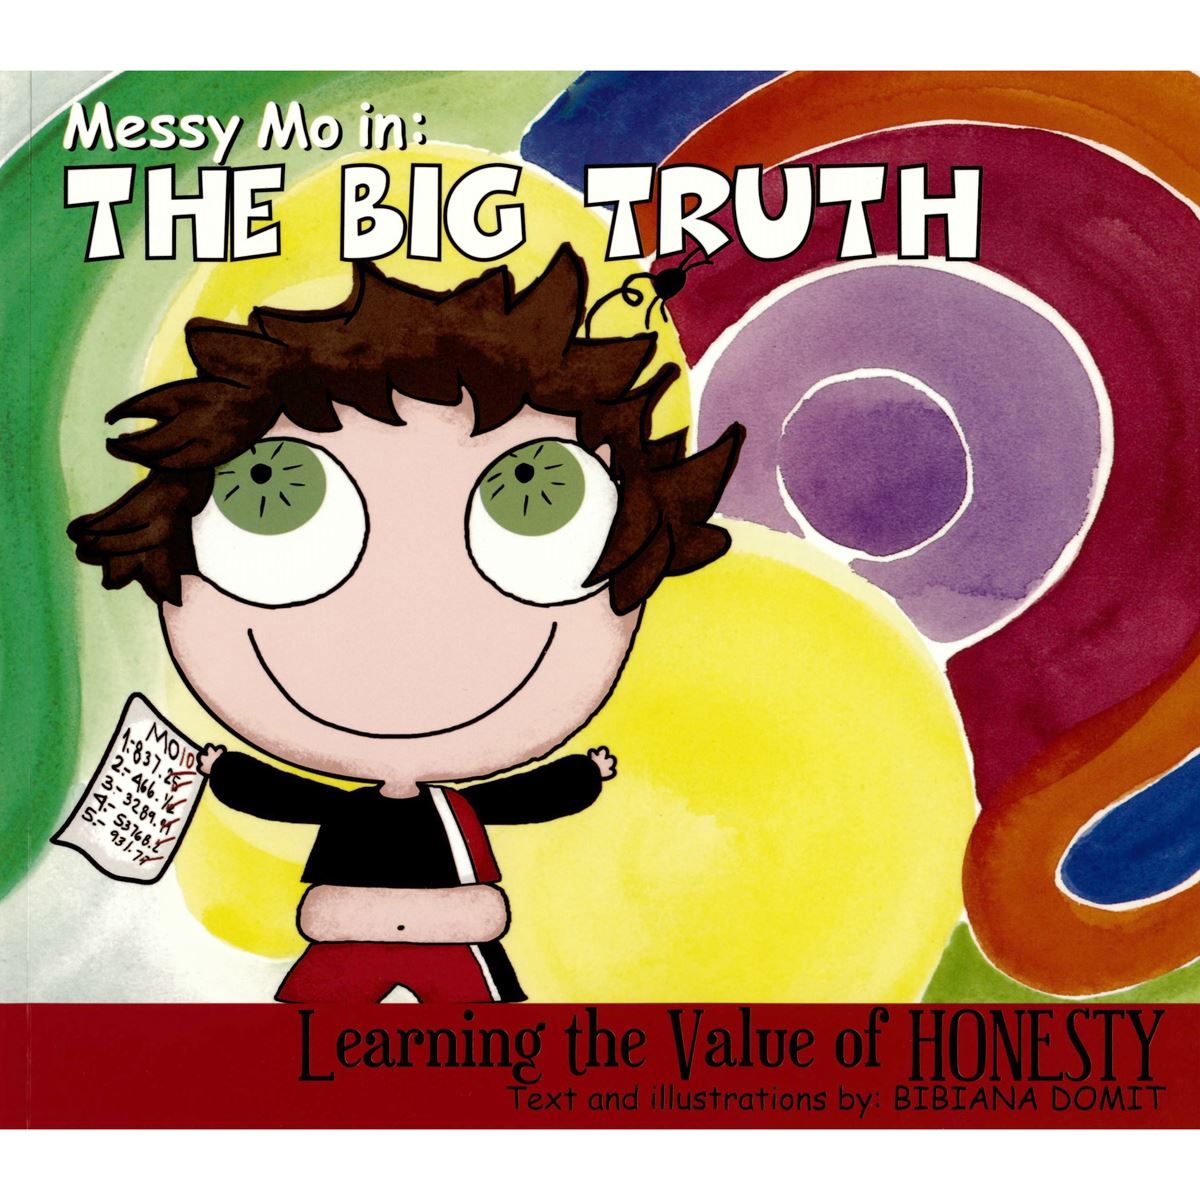 Messy Mo: The big truth